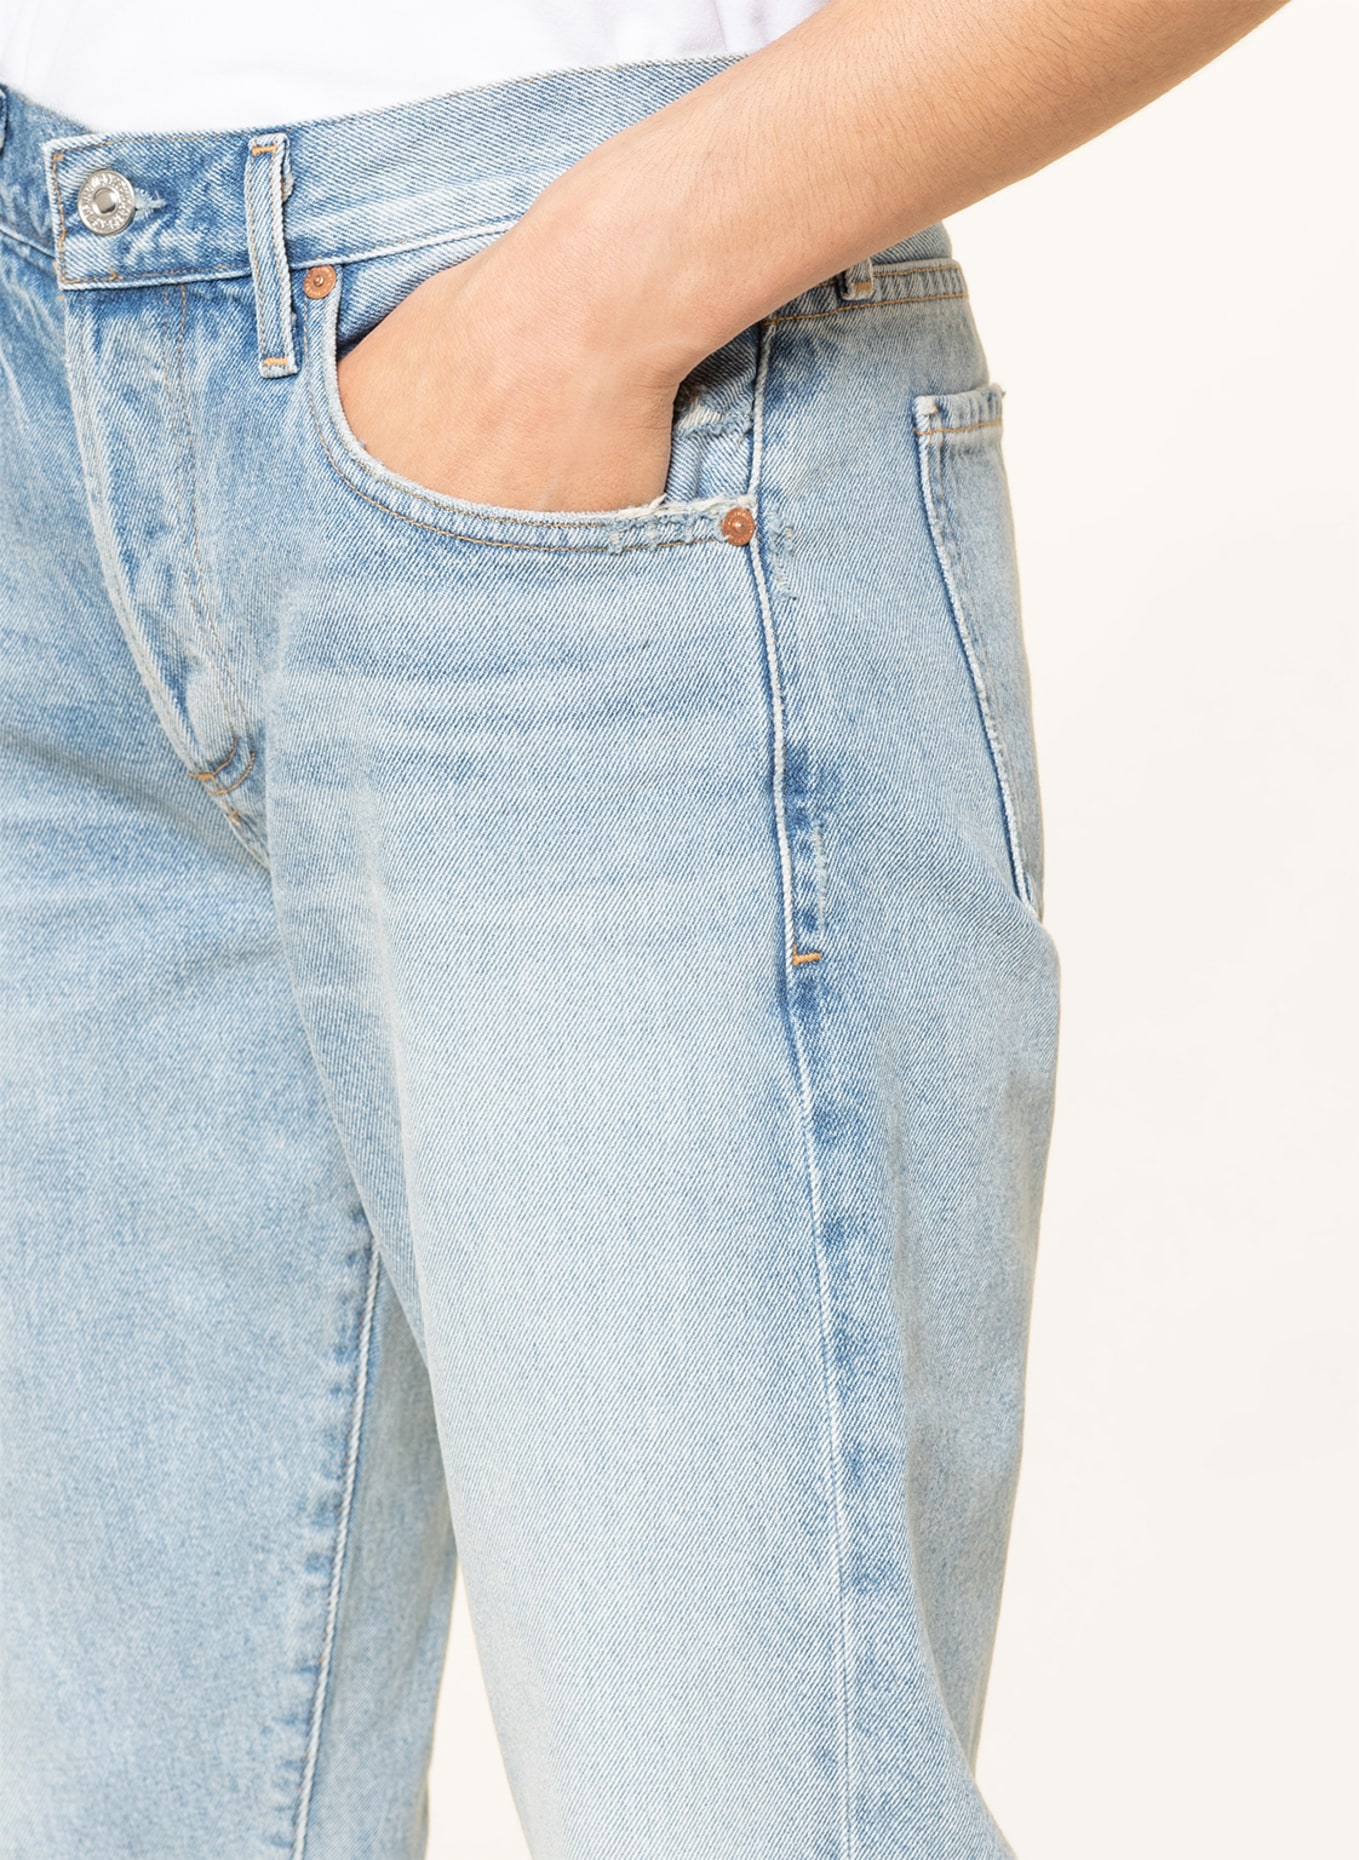 CITIZENS of HUMANITY Boyfriend jeans EMERSON , Color: Night Cap lt ind w/damage (Image 5)